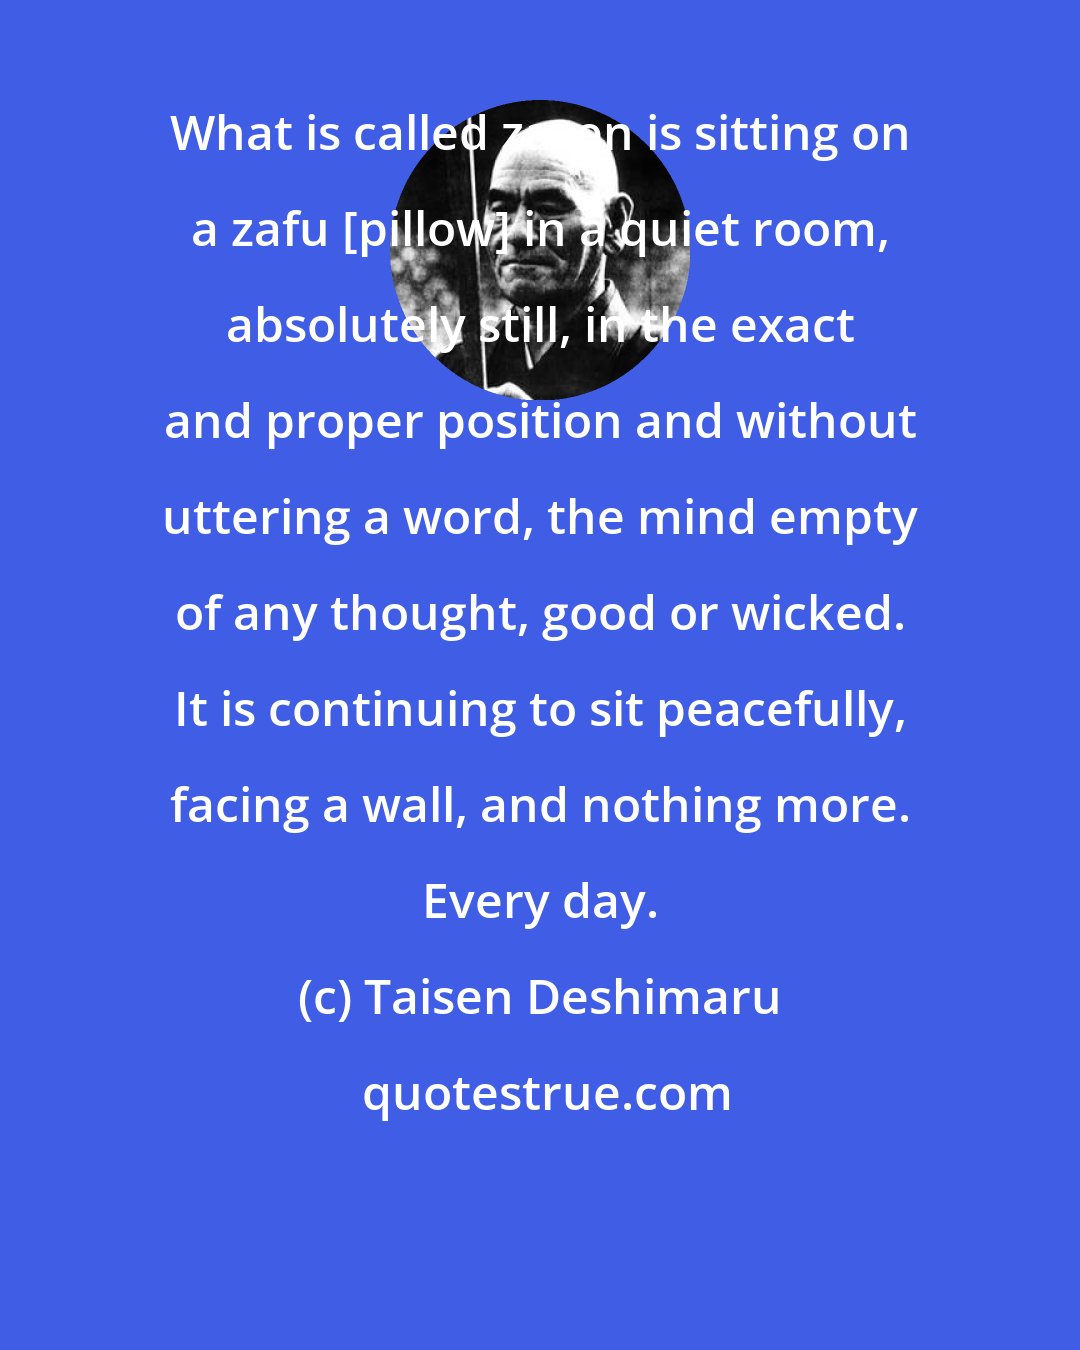 Taisen Deshimaru: What is called zazen is sitting on a zafu [pillow] in a quiet room, absolutely still, in the exact and proper position and without uttering a word, the mind empty of any thought, good or wicked. It is continuing to sit peacefully, facing a wall, and nothing more. Every day.